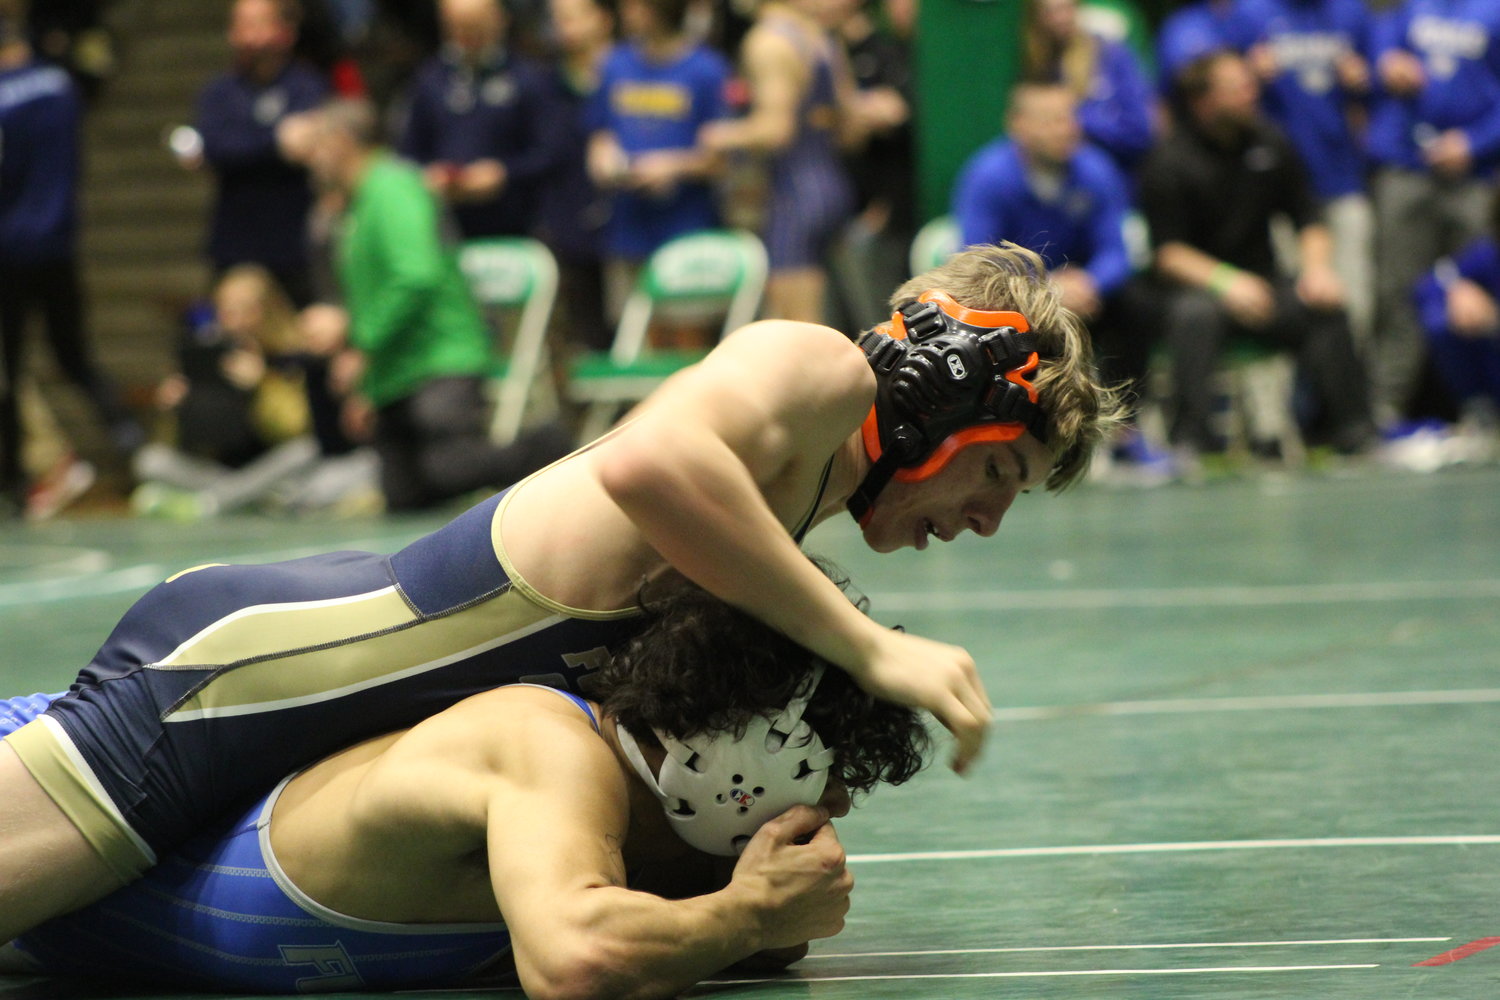 Fountain Central’s Waylon Frazee wrestles at the New Castle semi-state last season. During his three year career, Frazee made semi-state all three years and had an overall record of 90-13.